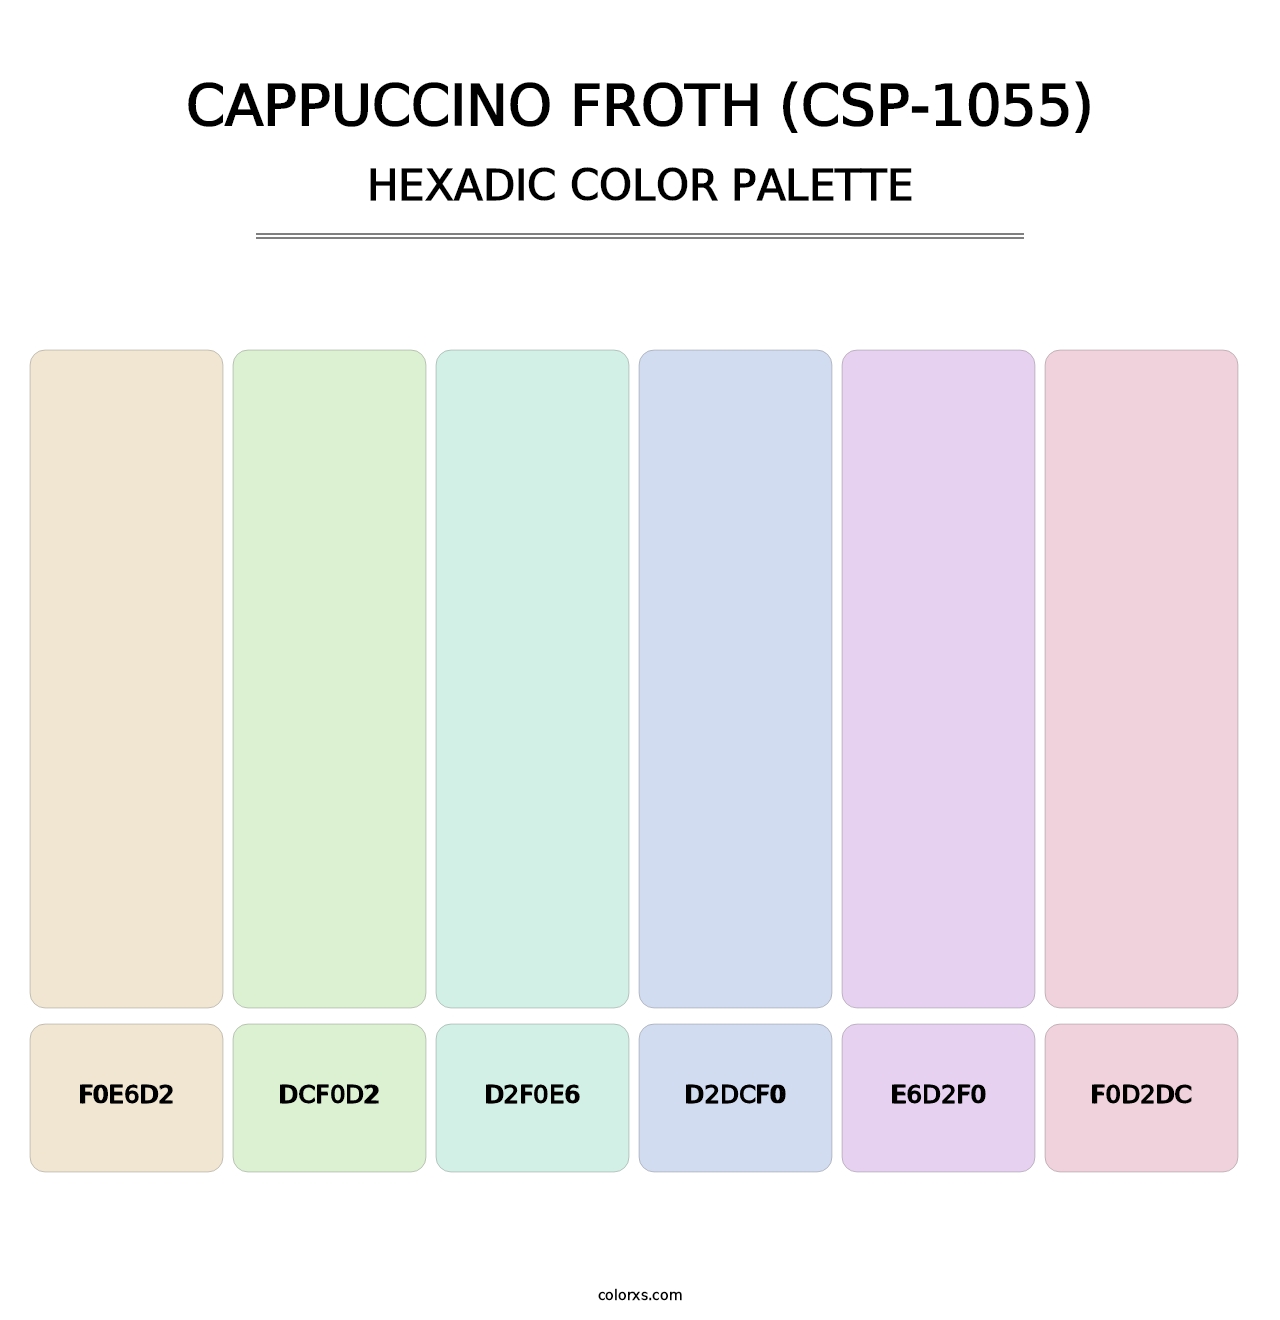 Cappuccino Froth (CSP-1055) - Hexadic Color Palette